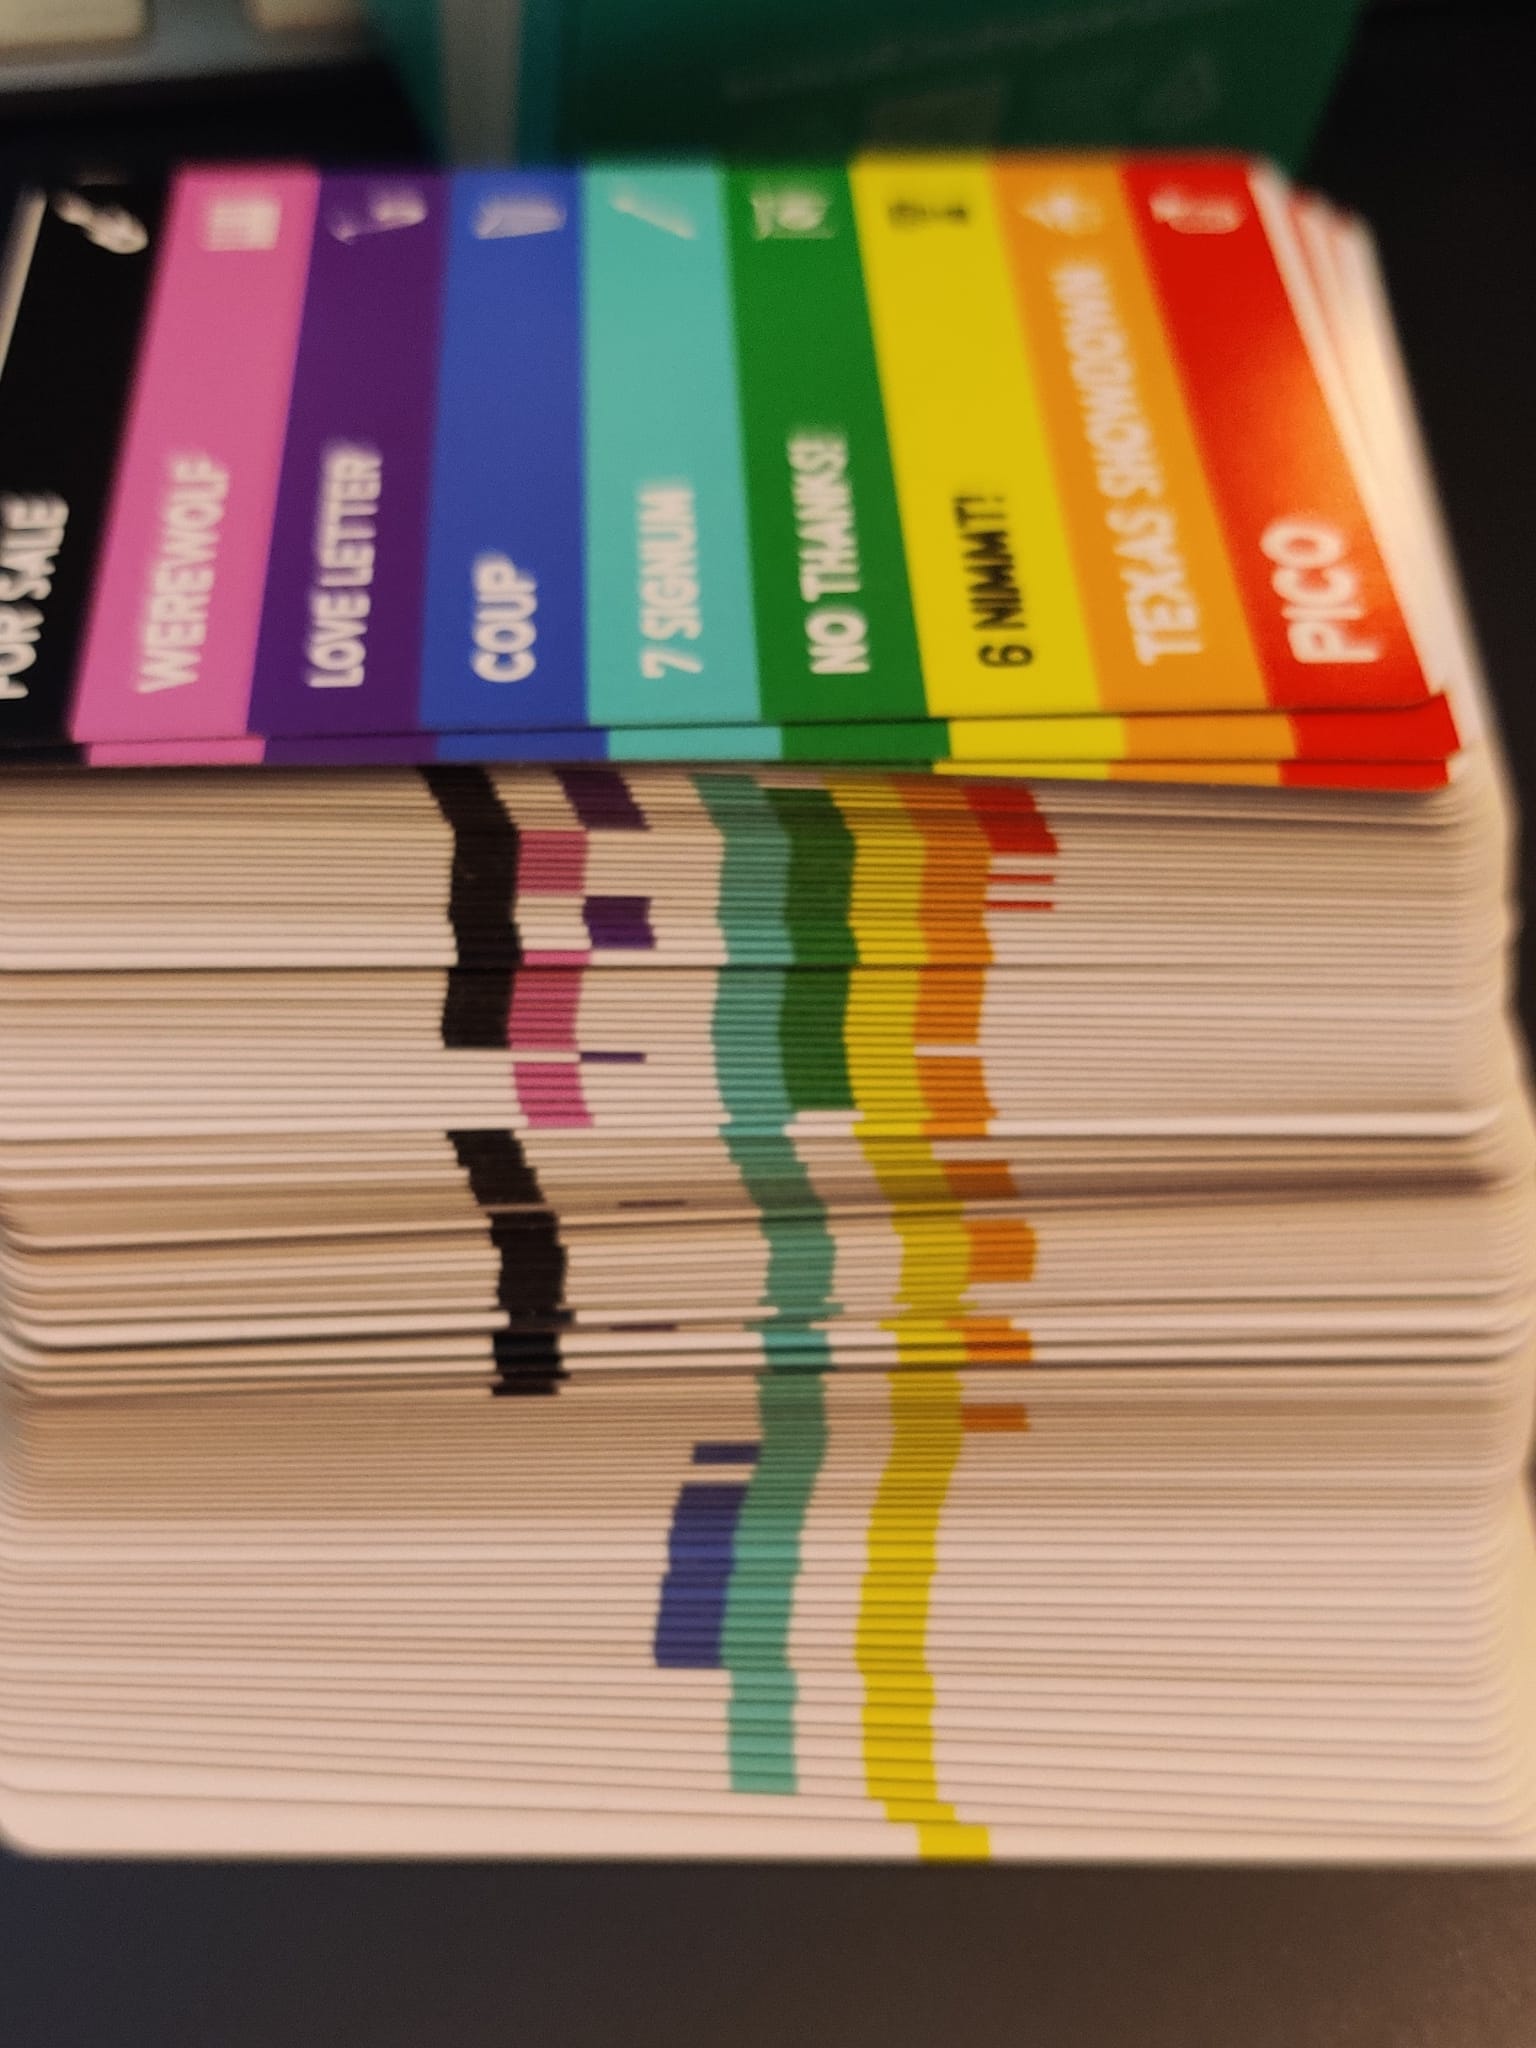 A deck of white cards with varied colored stripes on the side.